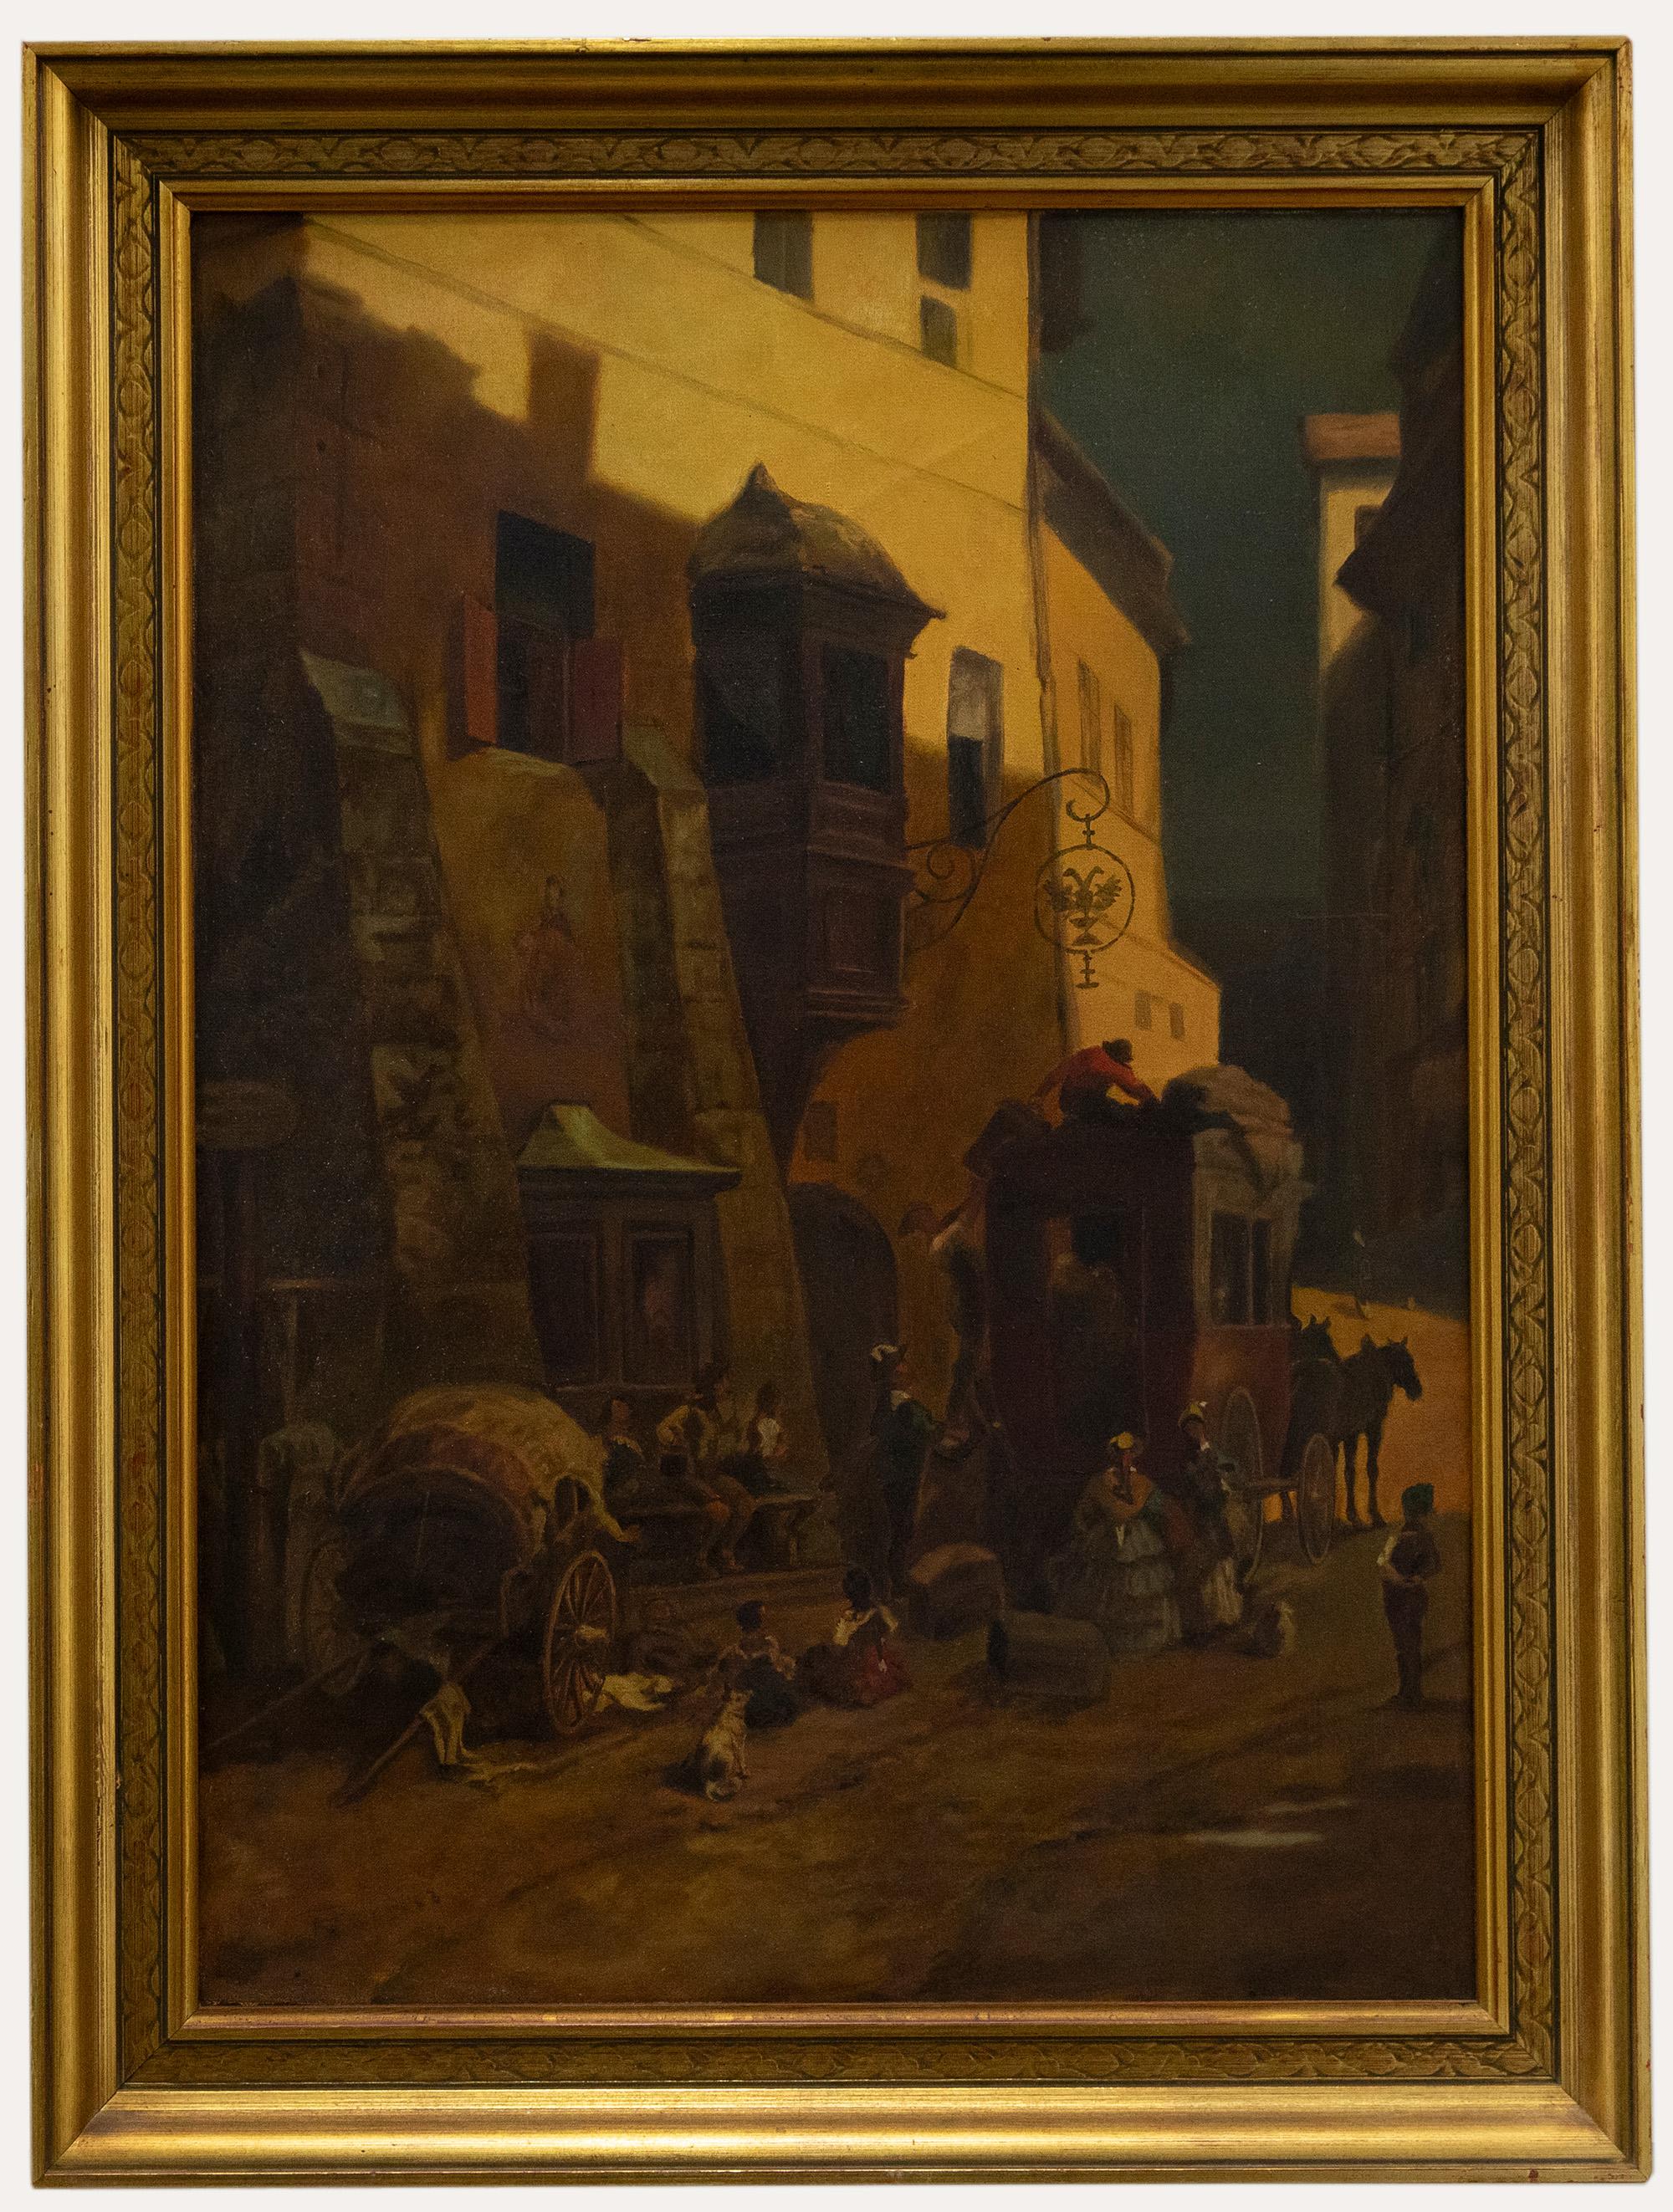 Unknown Figurative Painting - After Carl Spitzweg - 20th Century Oil, Zollstation in Zirl